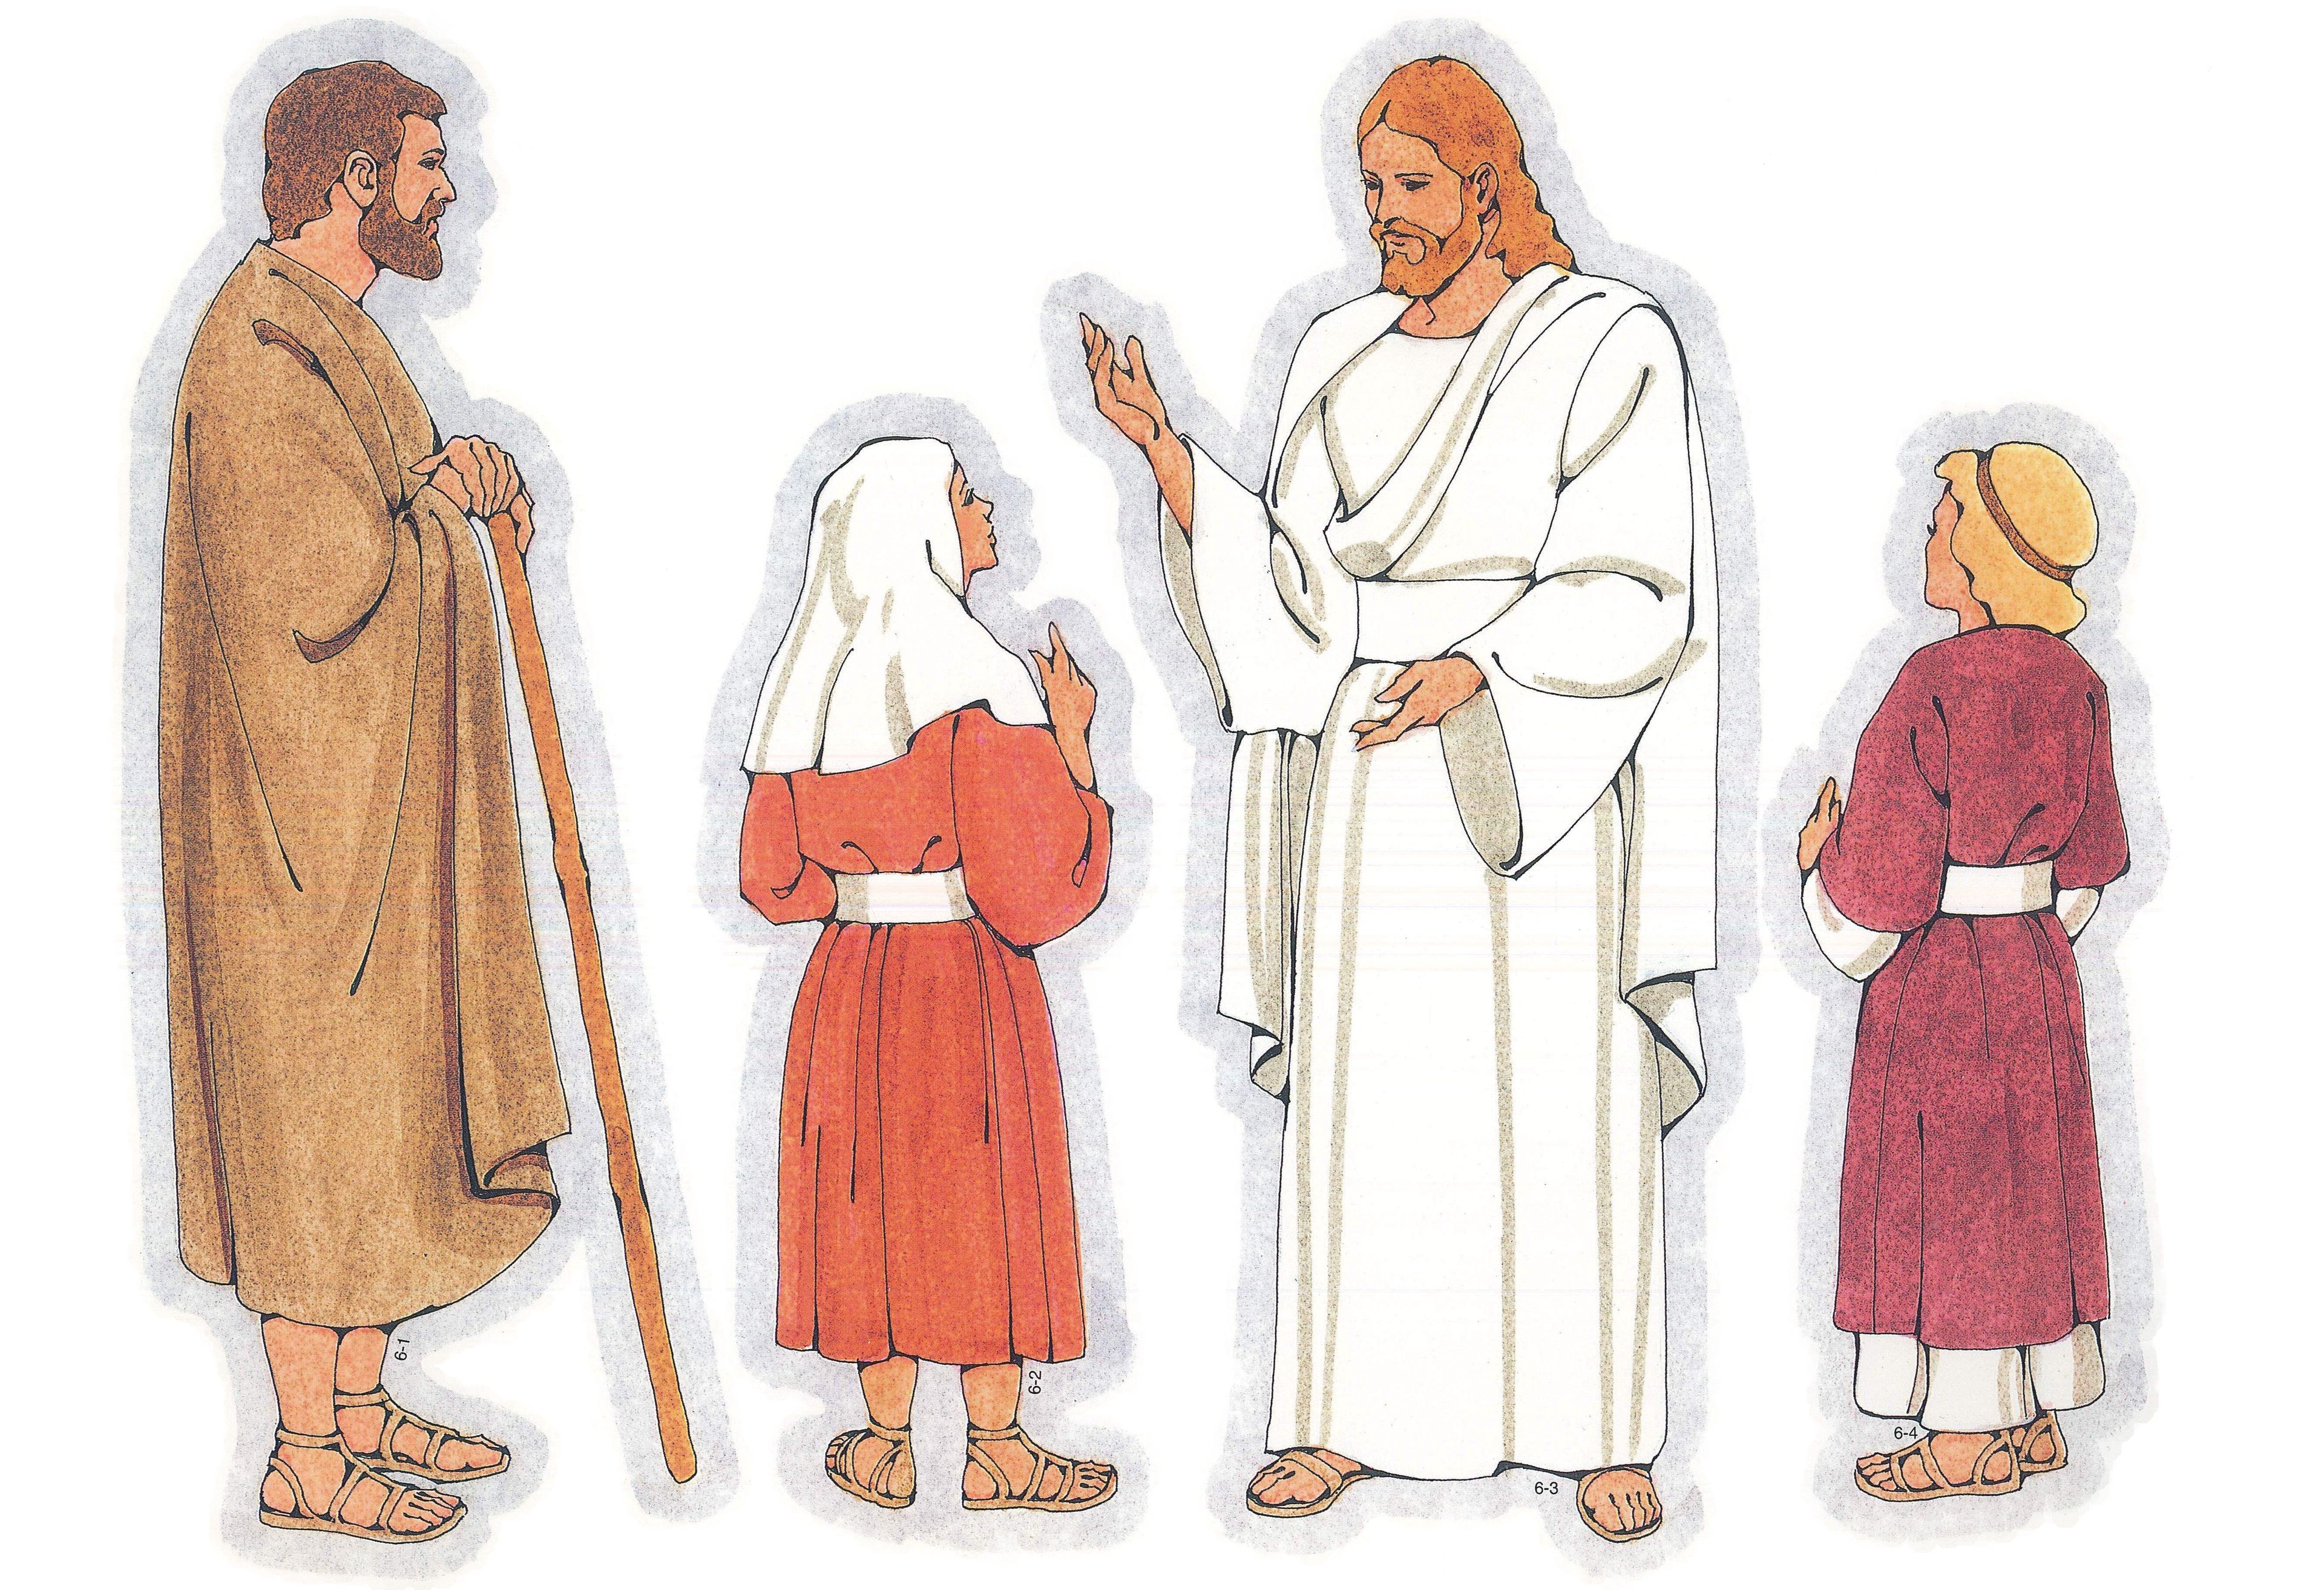 Primary Visual Aids: Cutouts 6-1, Biblical Man with Staff; 6-2, Biblical Girl; 6-3, Christ; 6-4, Biblical Girl.